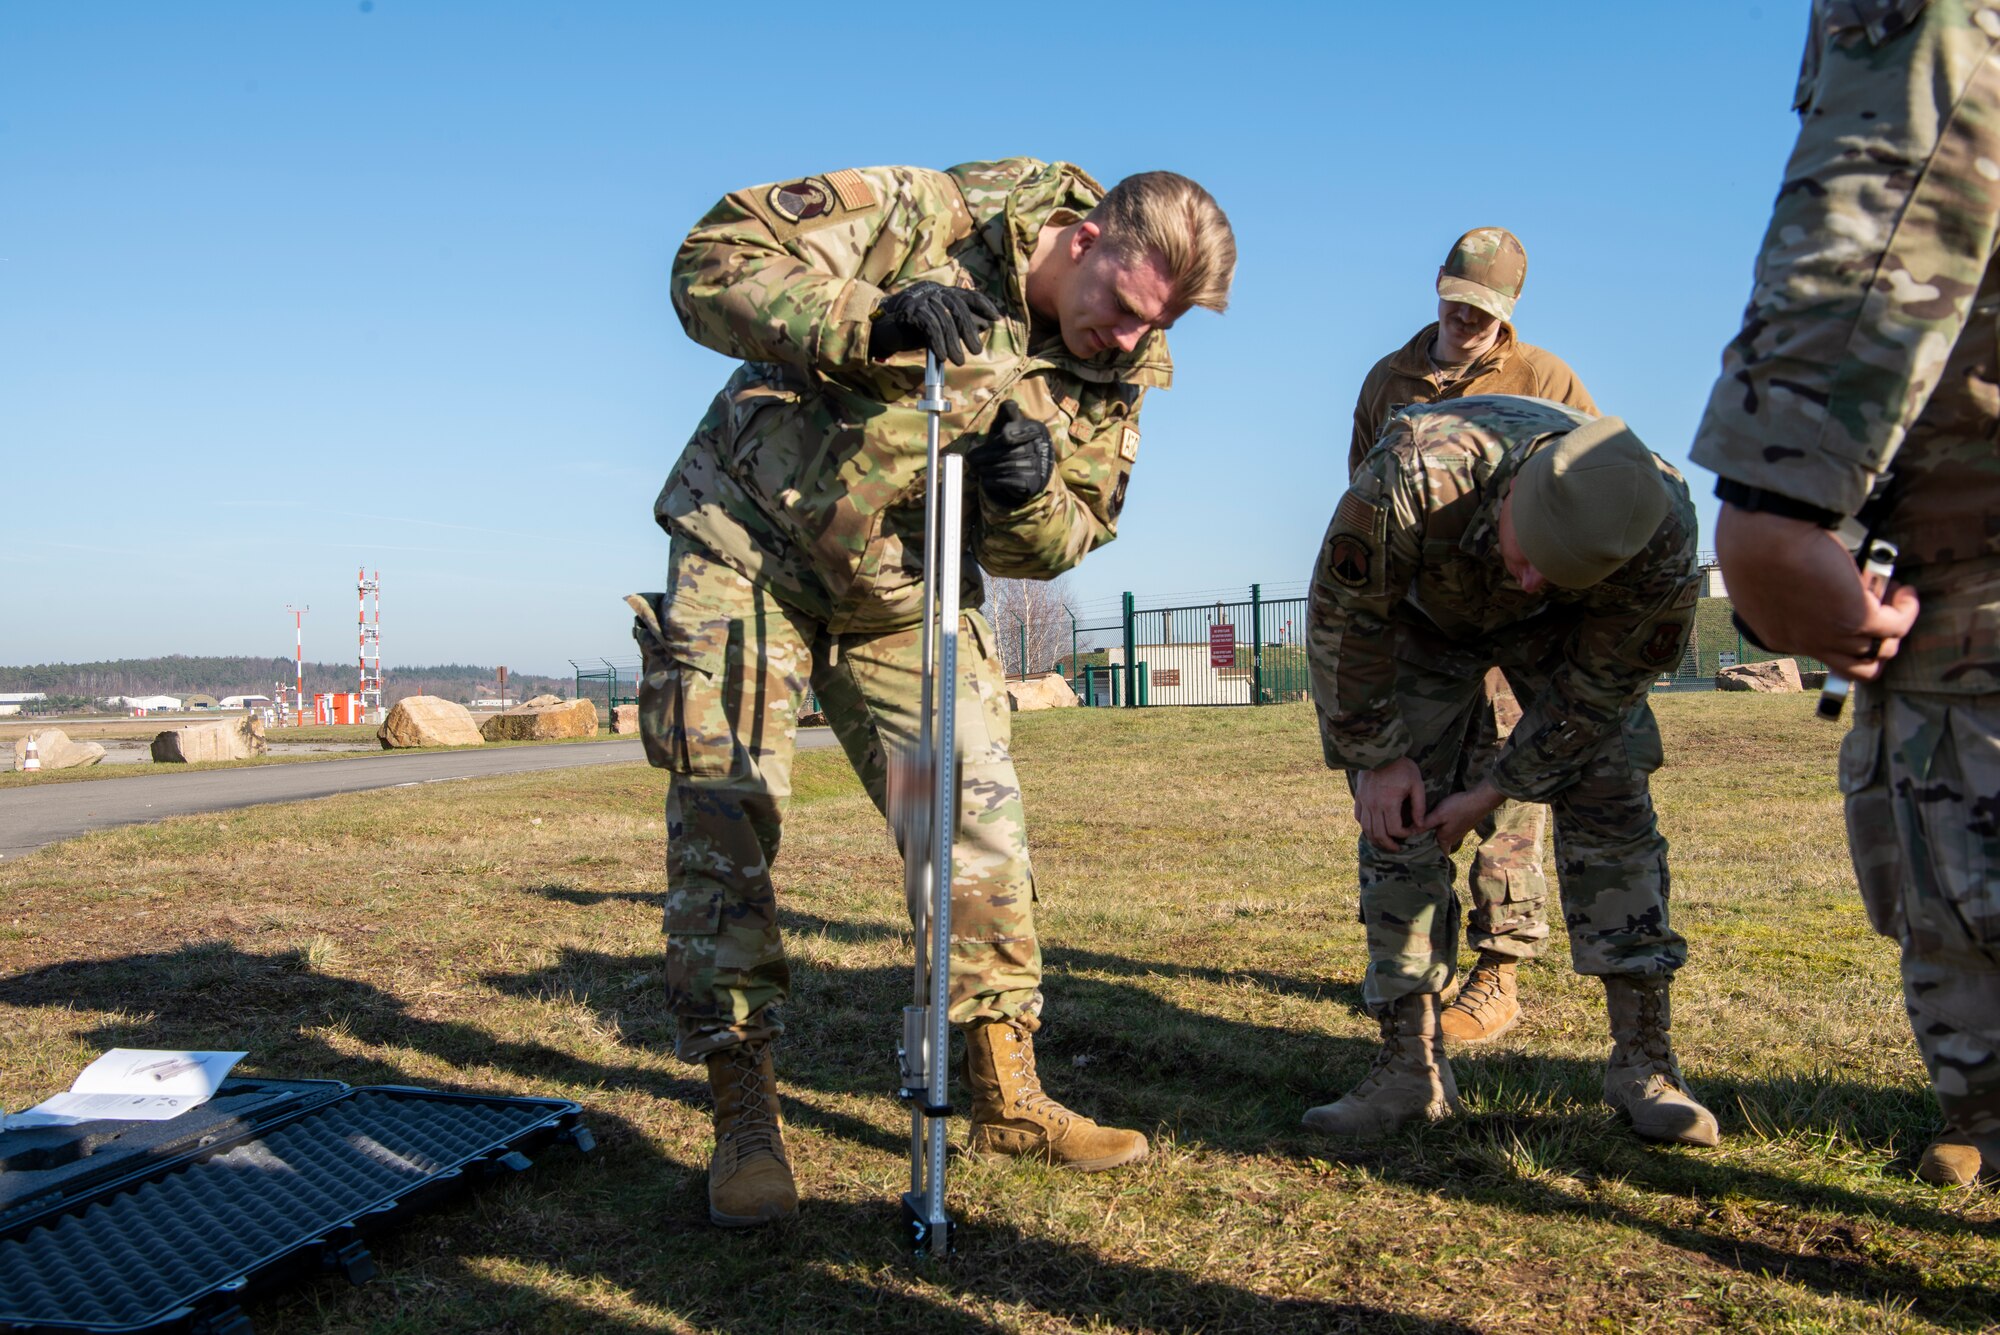 Airmen use tools in field